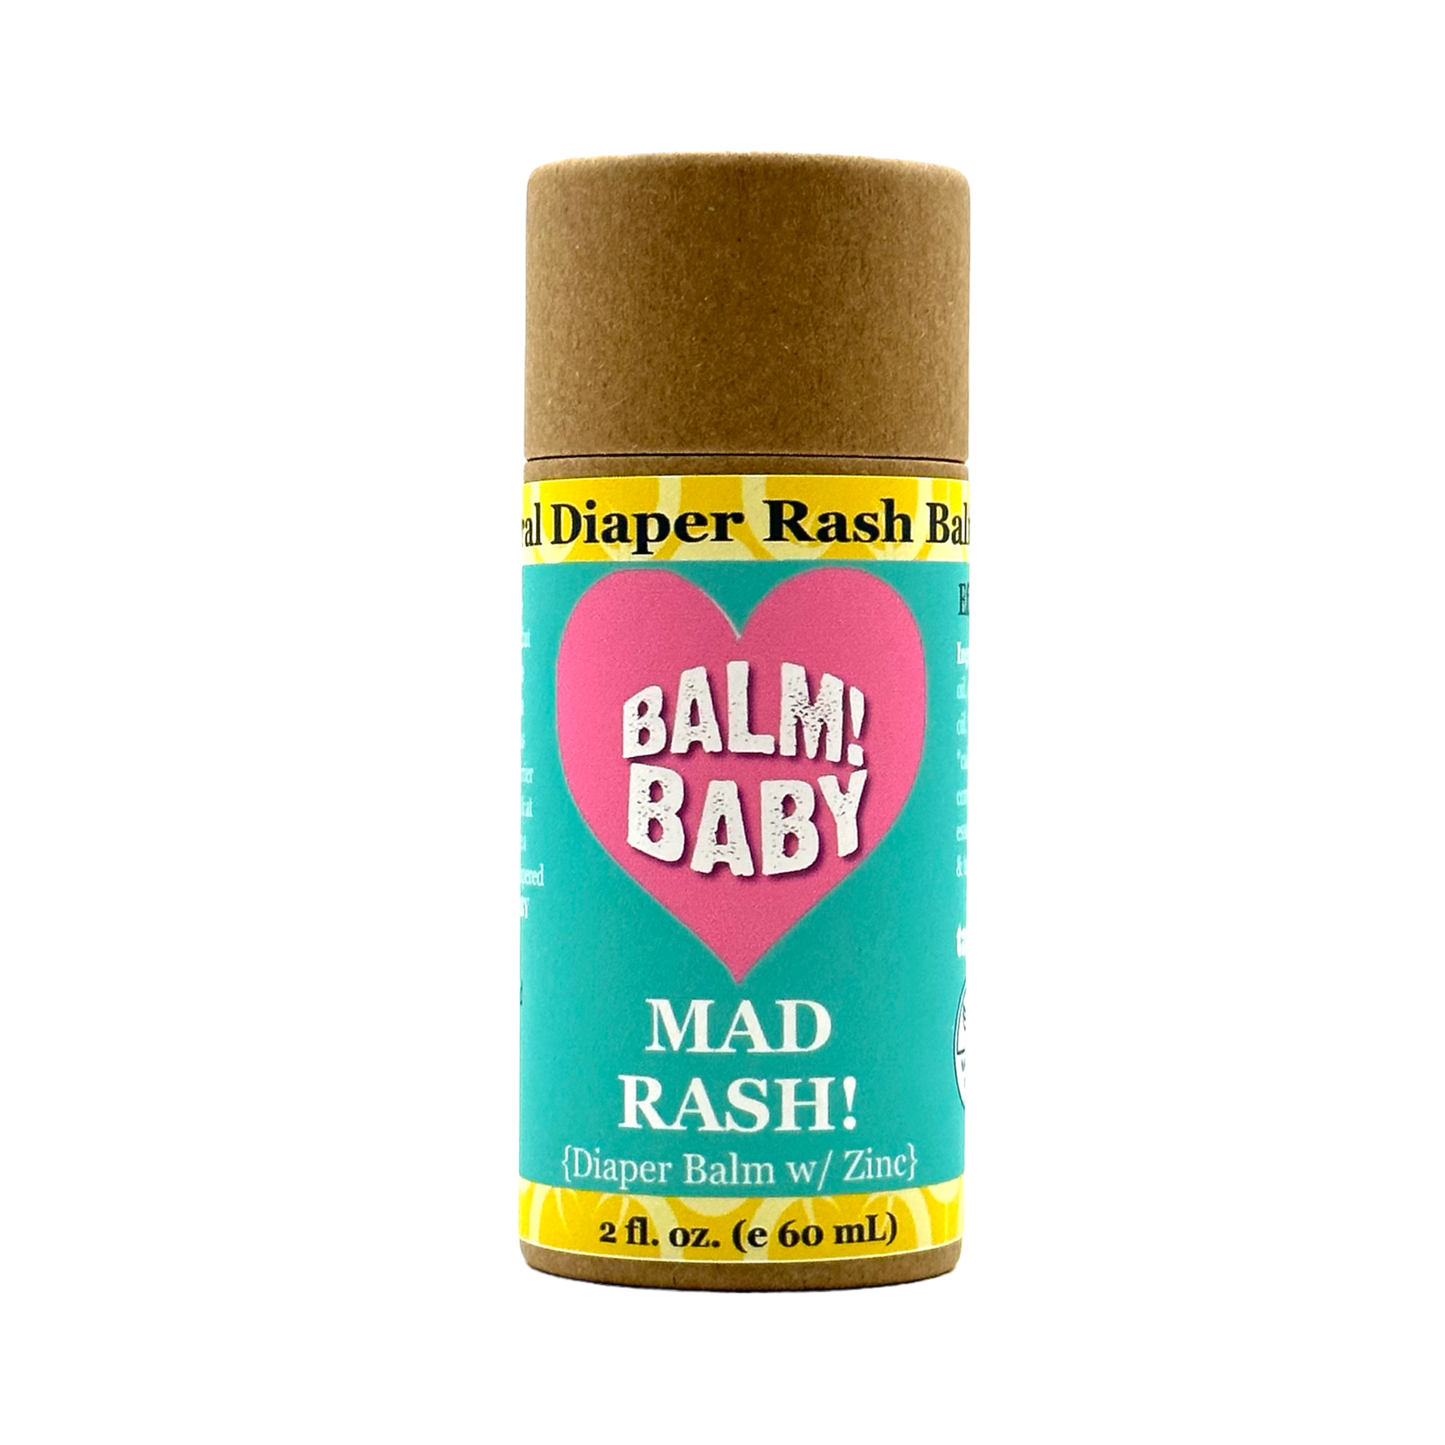 BALM! Baby - MAD RASH Diaper Balm and ALL purpose skin aid with natural, protecting zinc in BIODEGRADABLE STICK